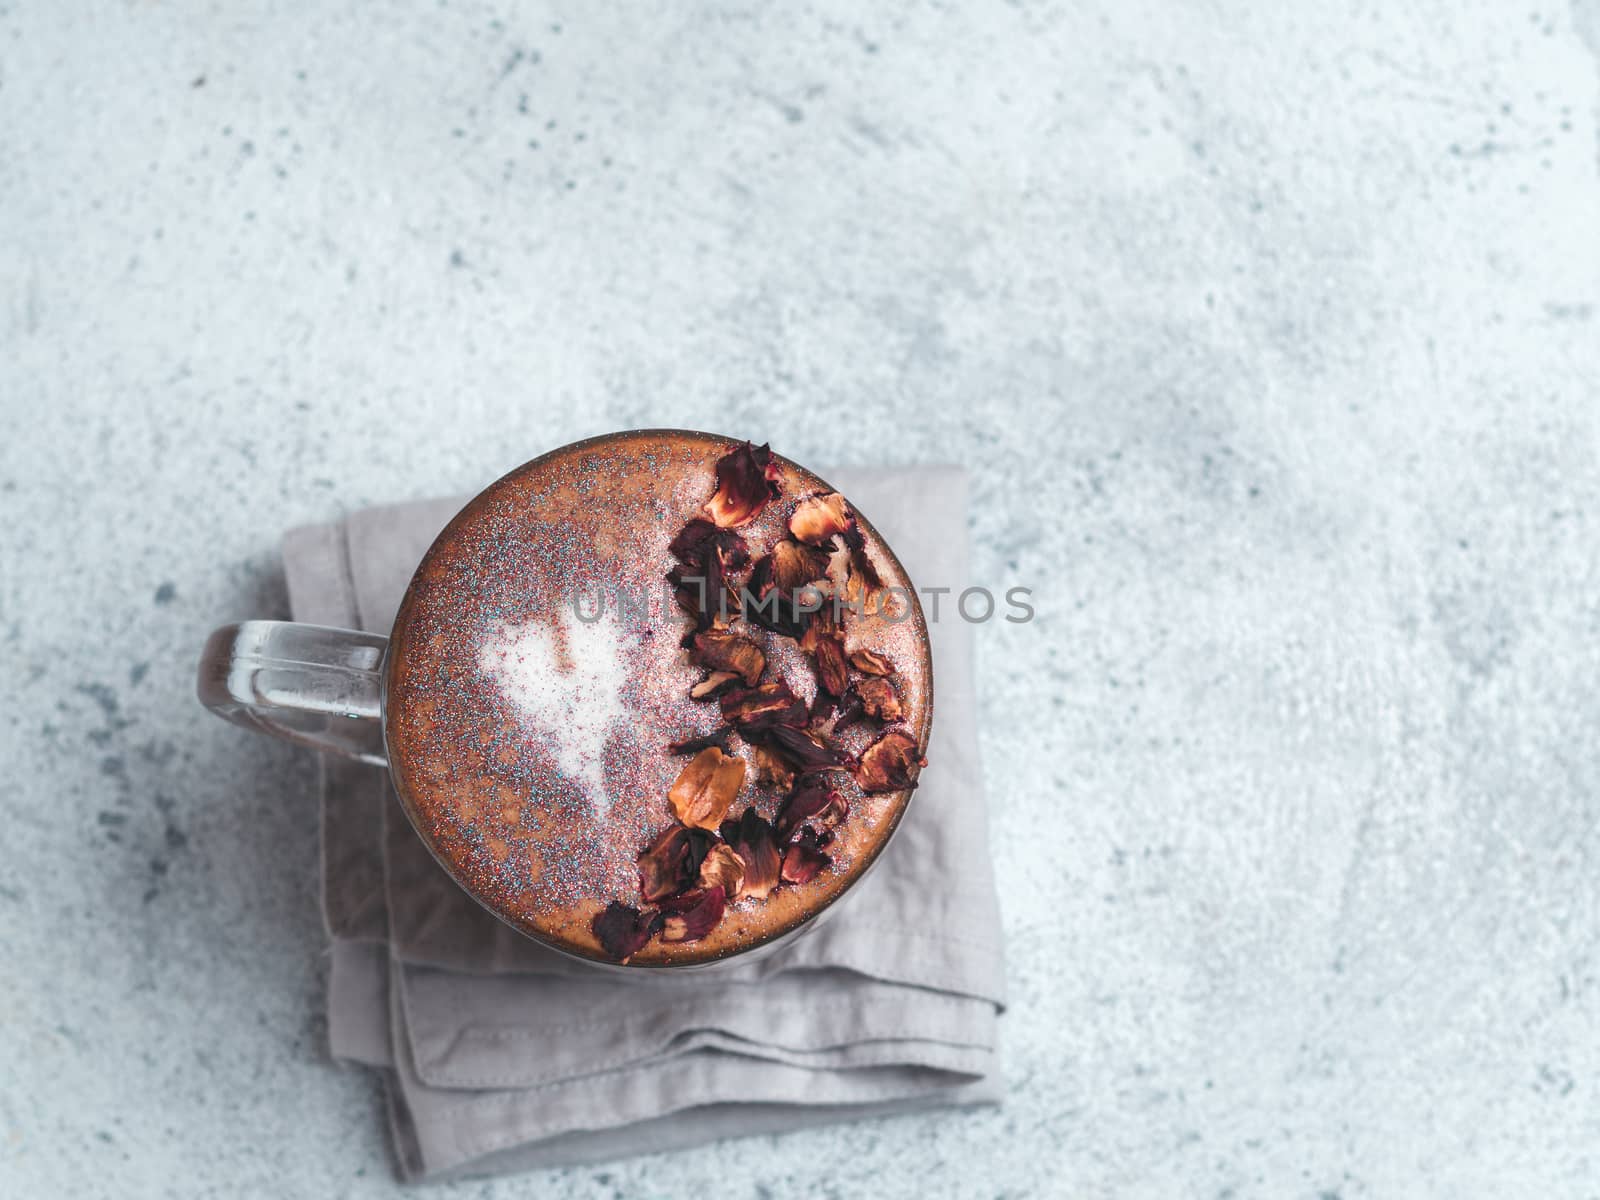 Trendy Coffee with edible glitter and dried rose petals. Cup of sparkly coffee or diamond cappuccino on gray table. Copy space for text. Top view or flat lay.